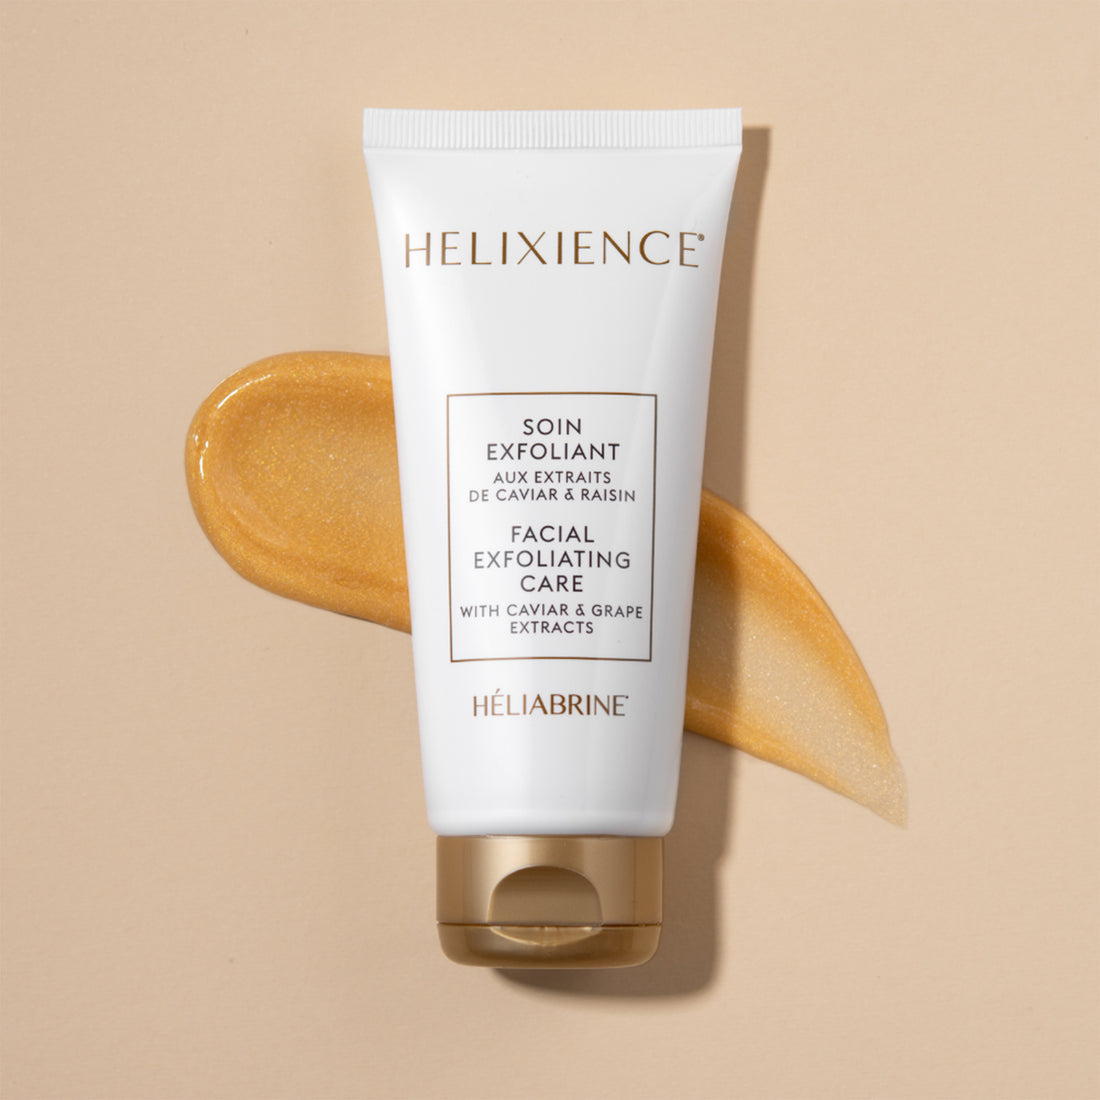 Helixience Facial Exfoliating Care